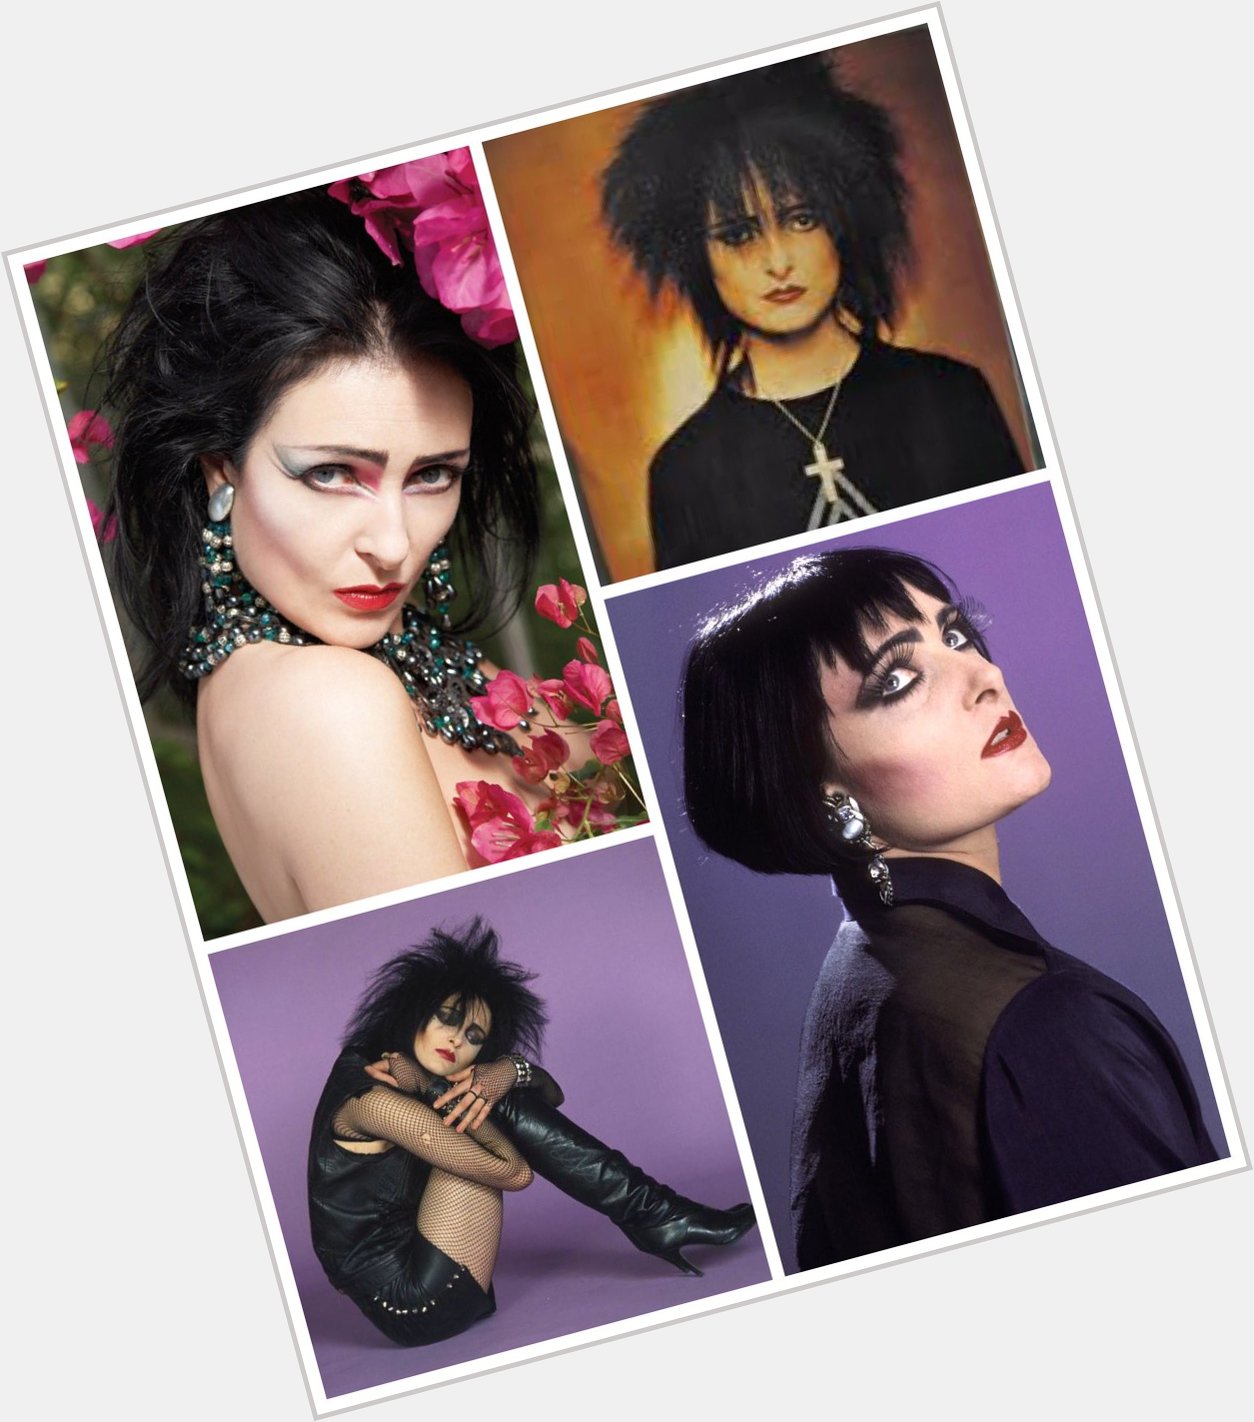 Siouxsie Sioux is Sixty today. Happy Birthday!    